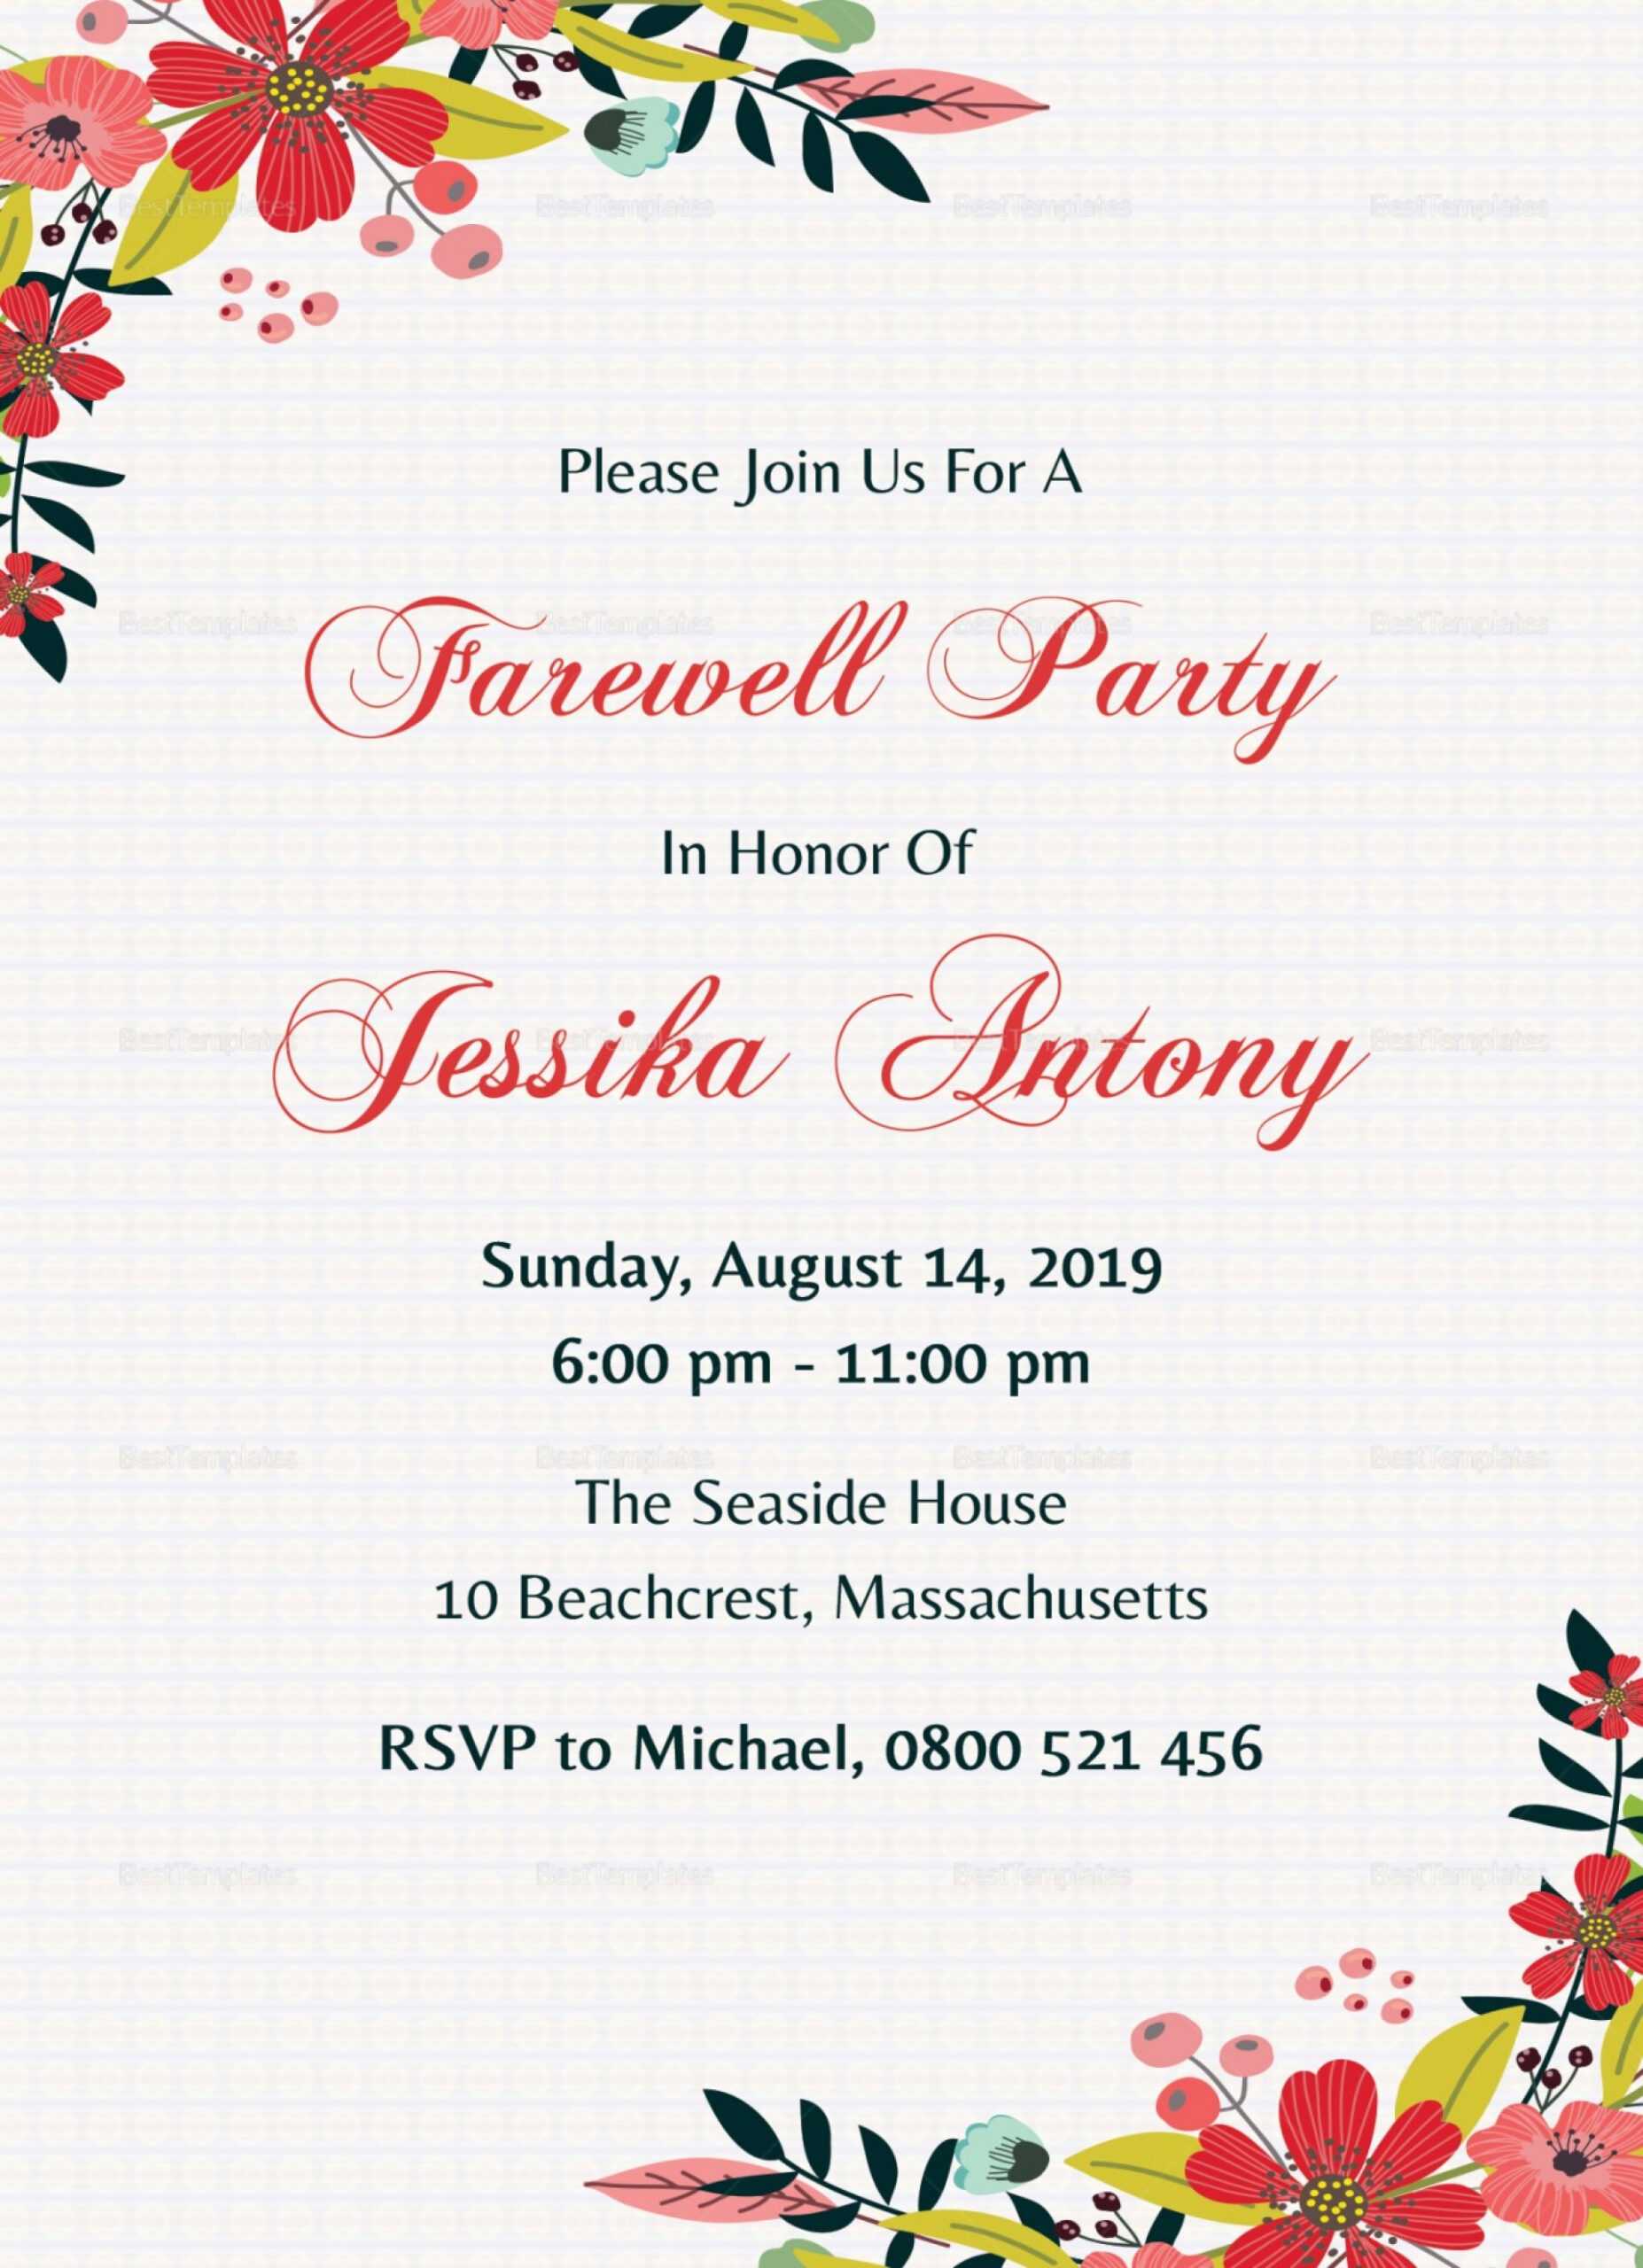 005 Farewell Invitation Template Free Ideas Beautiful Party Intended For Farewell Invitation Card Template